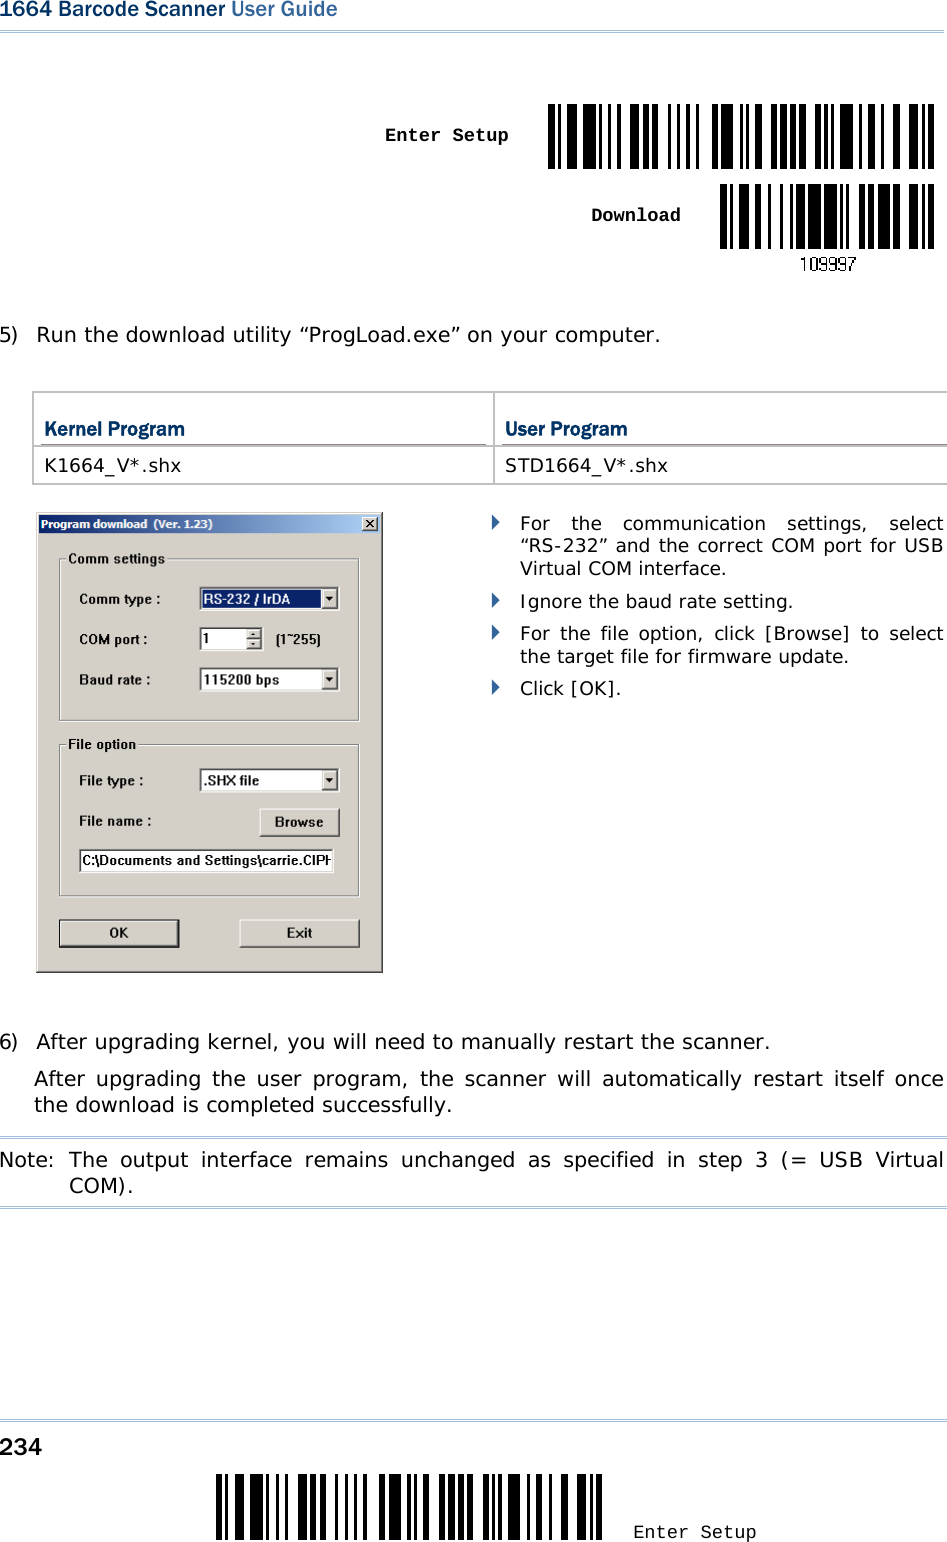 234 Enter Setup 1664 Barcode Scanner User Guide    Enter Setup Download 5) Run the download utility “ProgLoad.exe” on your computer.   Kernel Program  User Program K1664_V*.shx STD1664_V*.shx         For the communication settings, select “RS-232” and the correct COM port for USB Virtual COM interface.  Ignore the baud rate setting.  For the file option, click [Browse] to select the target file for firmware update.   Click [OK].    6) After upgrading kernel, you will need to manually restart the scanner.      After upgrading the user program, the scanner will automatically restart itself once the download is completed successfully.  Note: The output interface remains unchanged as specified in step 3 (= USB Virtual COM).       